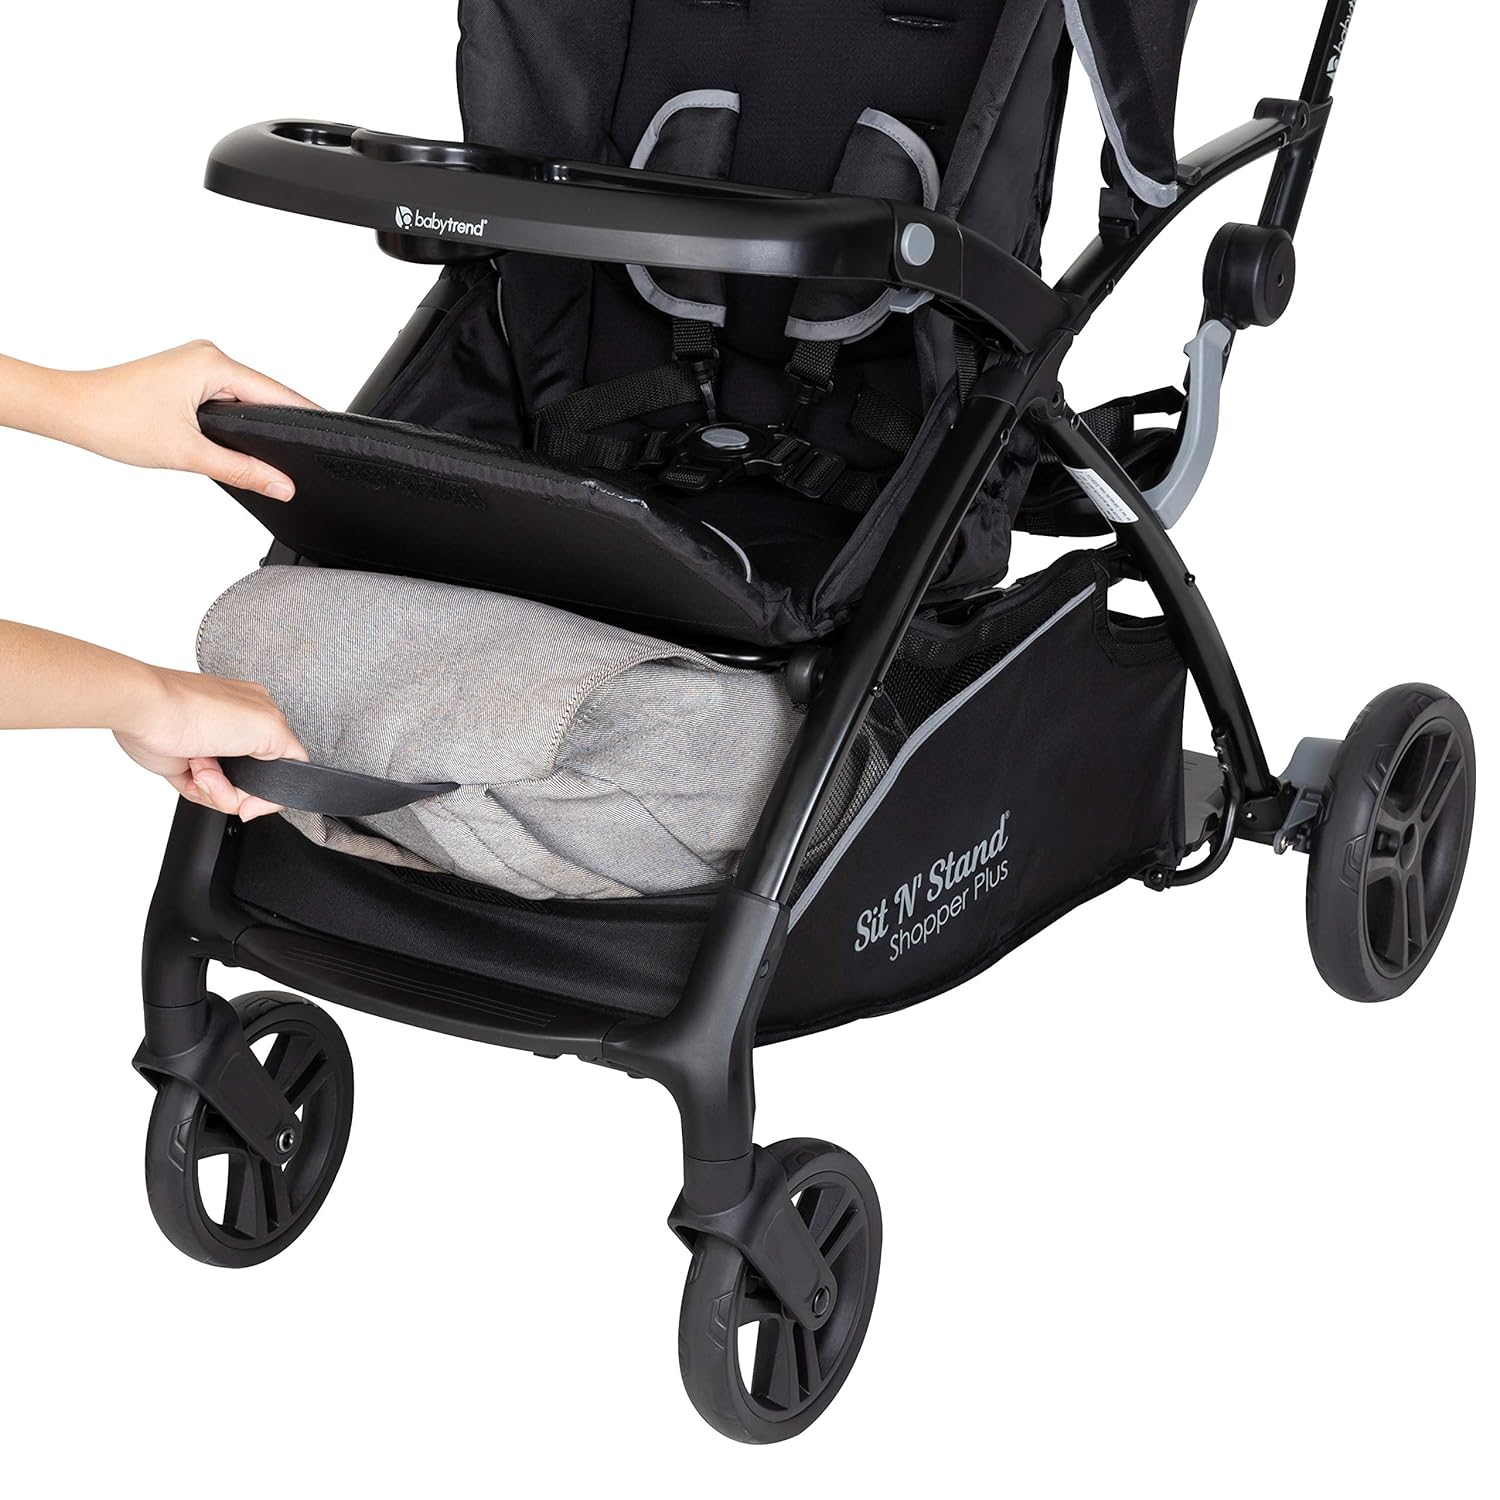 Baby Trend Sit N Stand Ultra Stroller, Millennium - Baby Trend Sit N' Stand Ultra Stroller Millennium Review